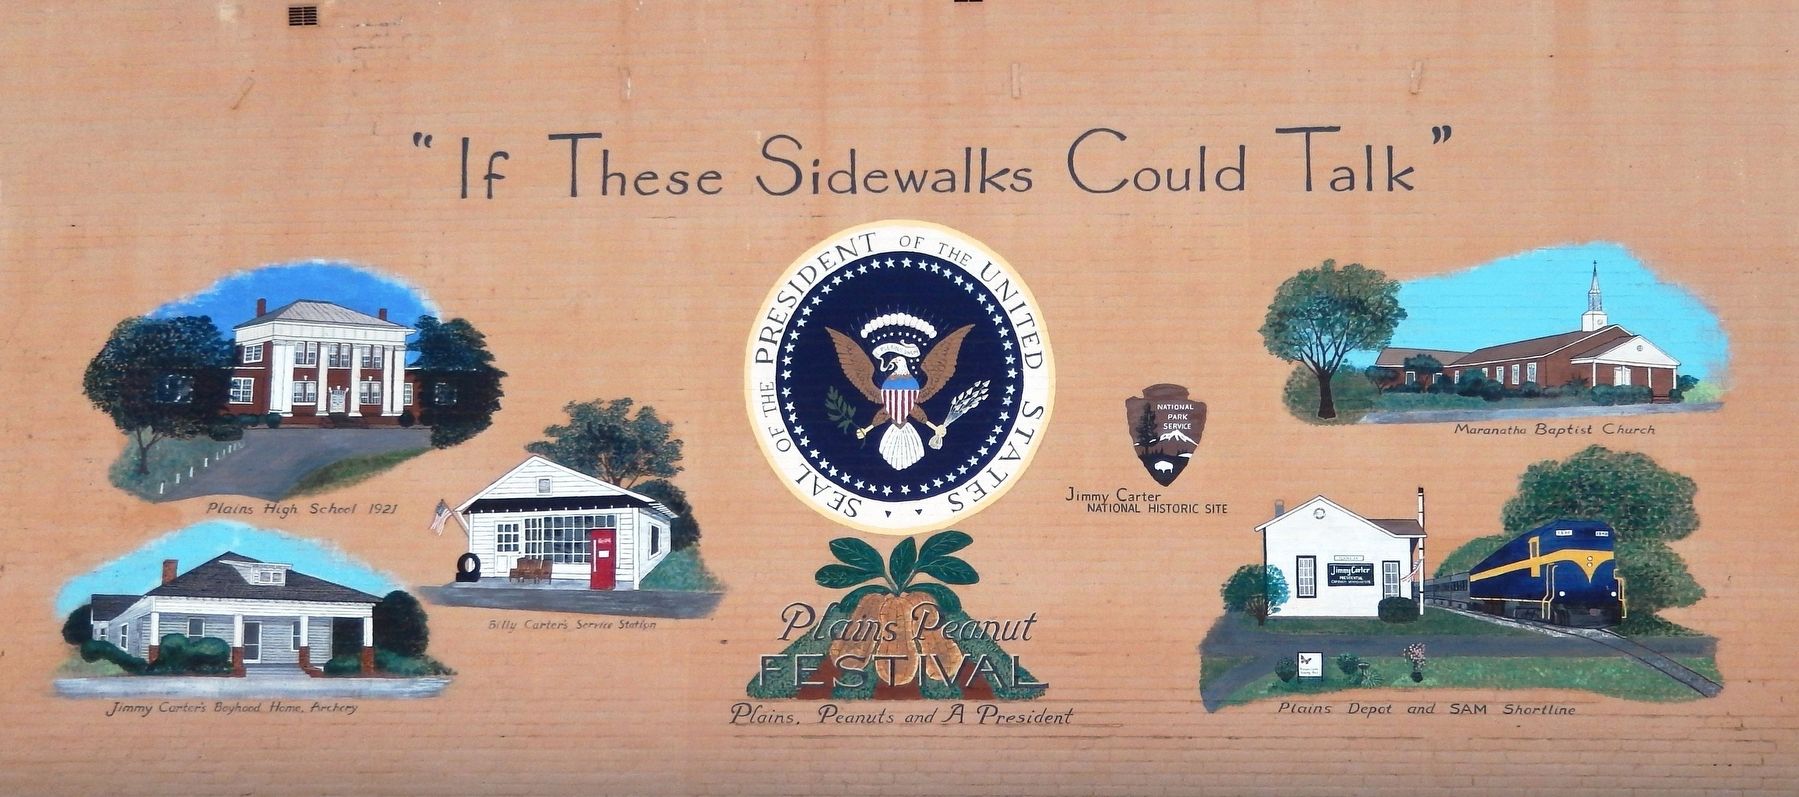 If These Sidewalks Could Talk Mural<br>(<i>east wall of Plains Pharmacy</i>) image. Click for full size.